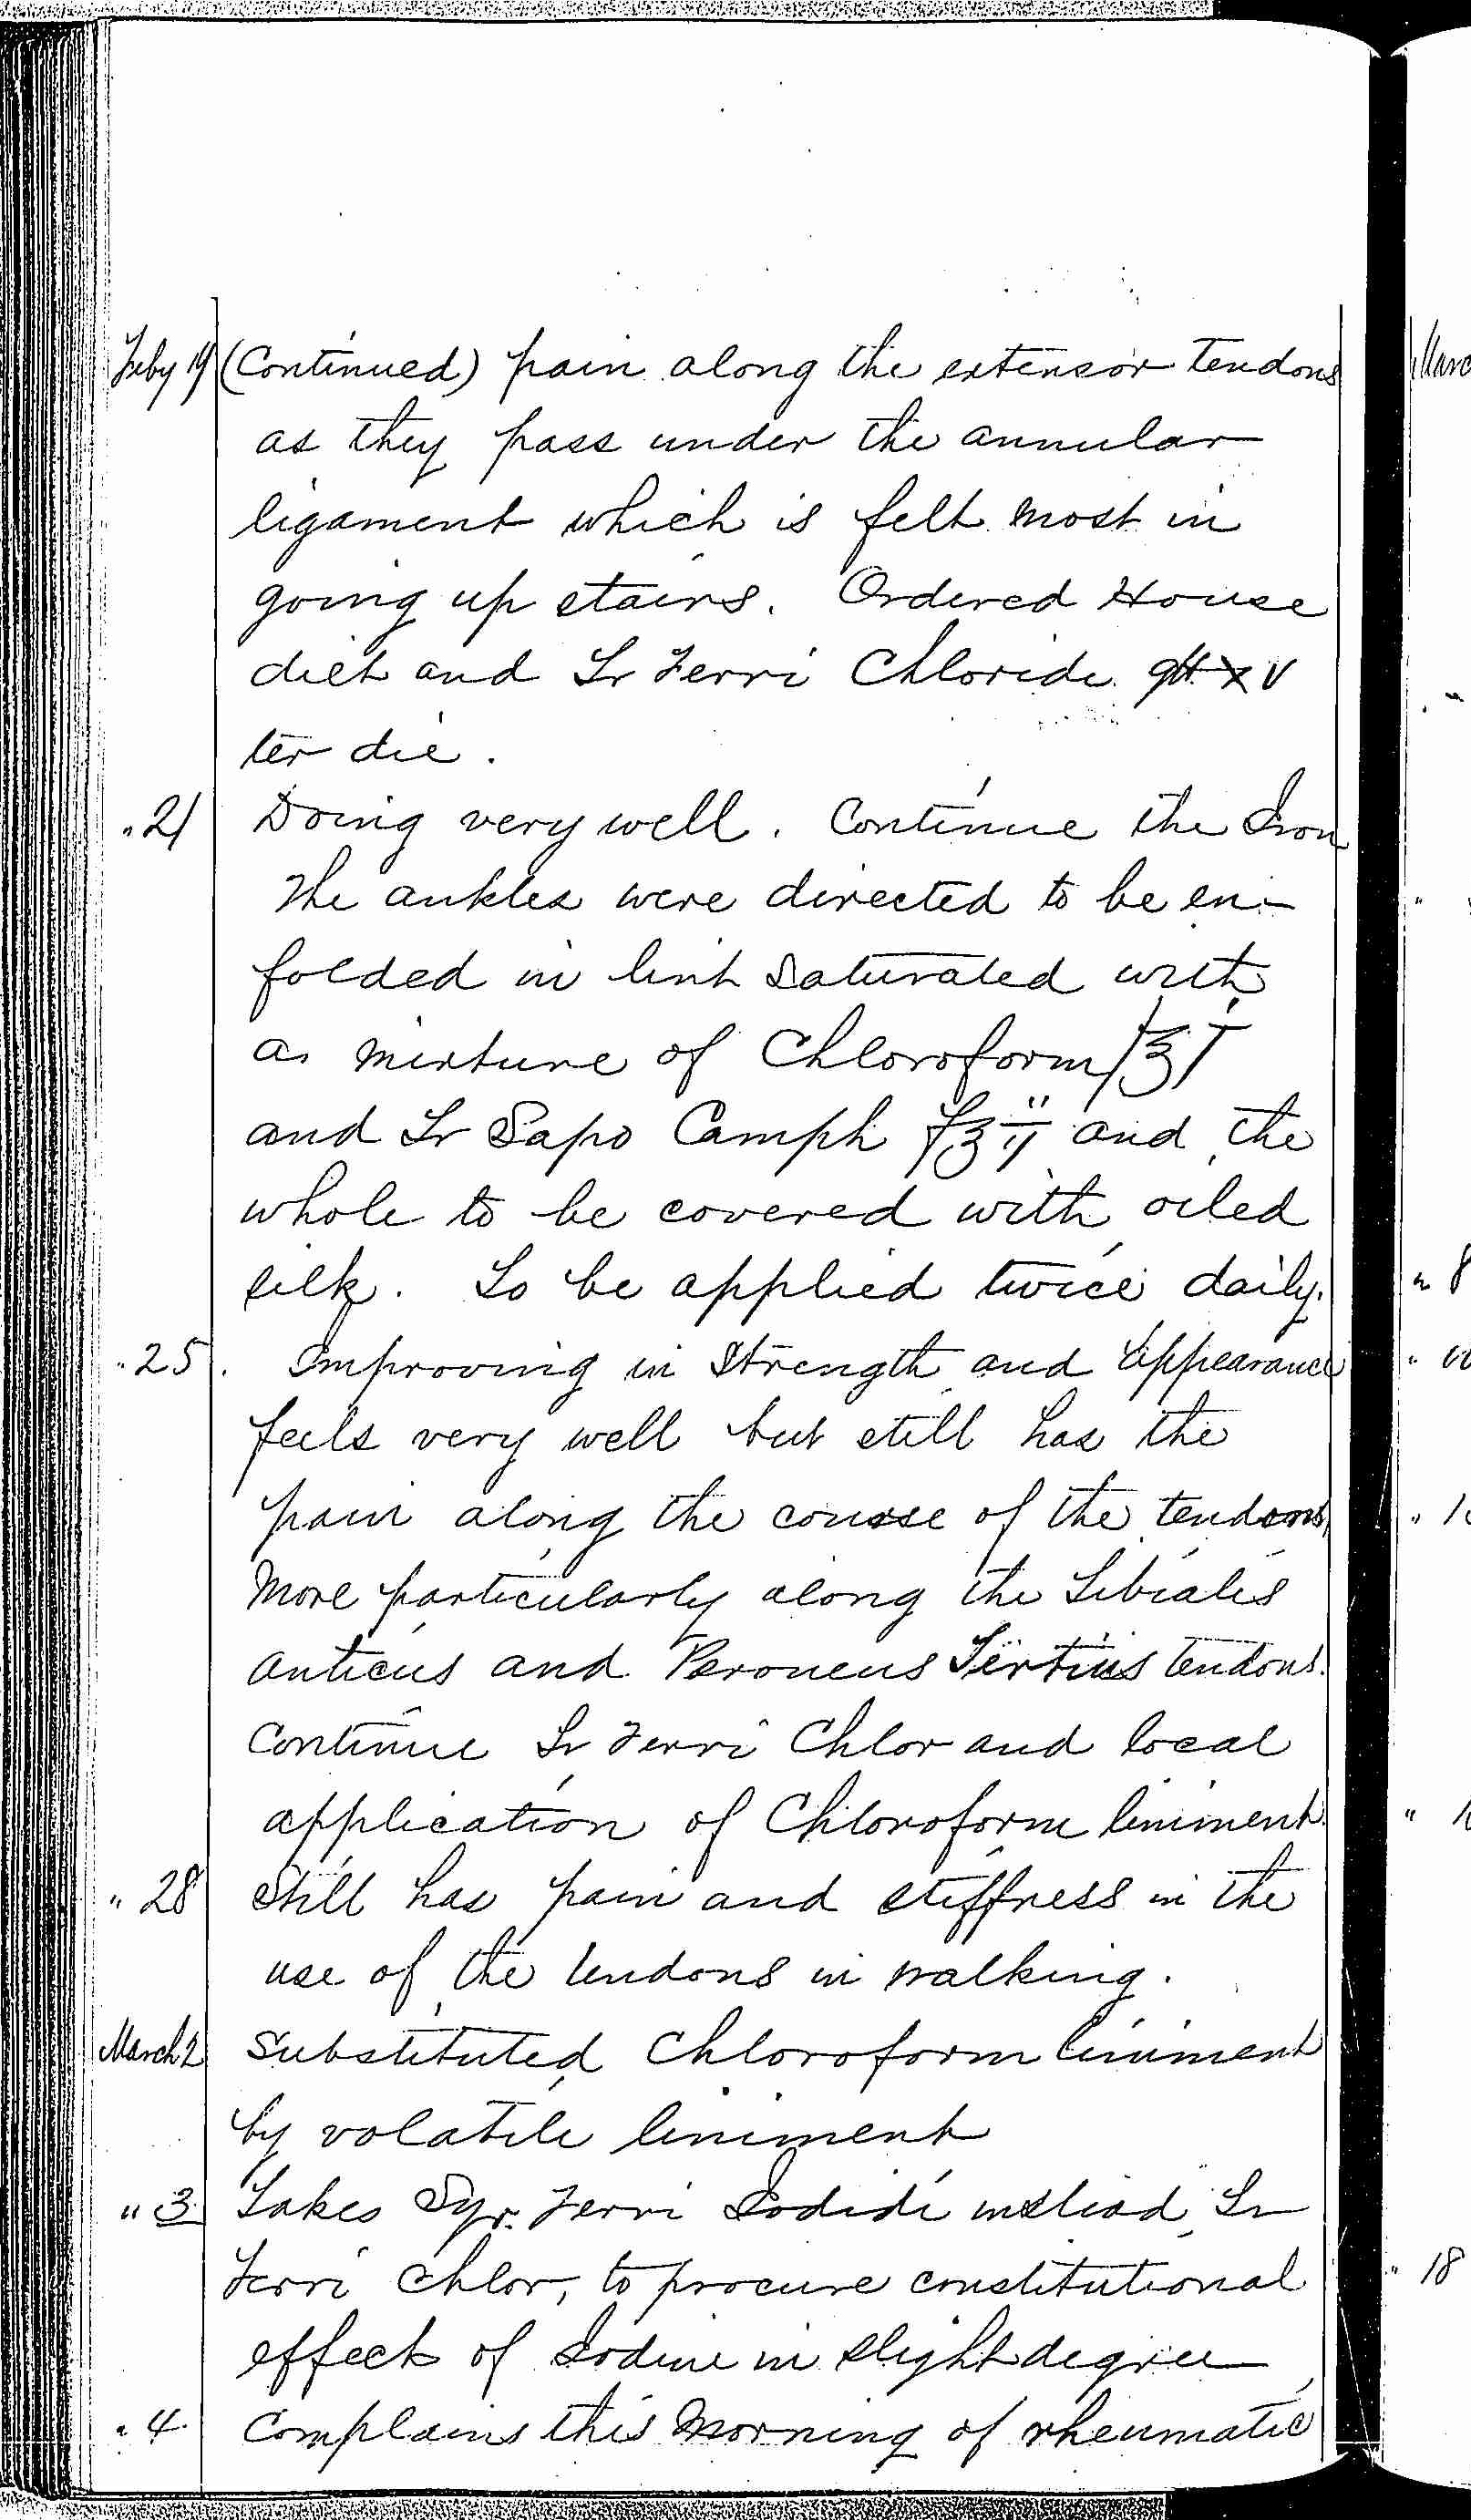 Entry for James McNalty (page 2 of 3) in the log Hospital Tickets and Case Papers - Naval Hospital - Washington, D.C. - 1868-69